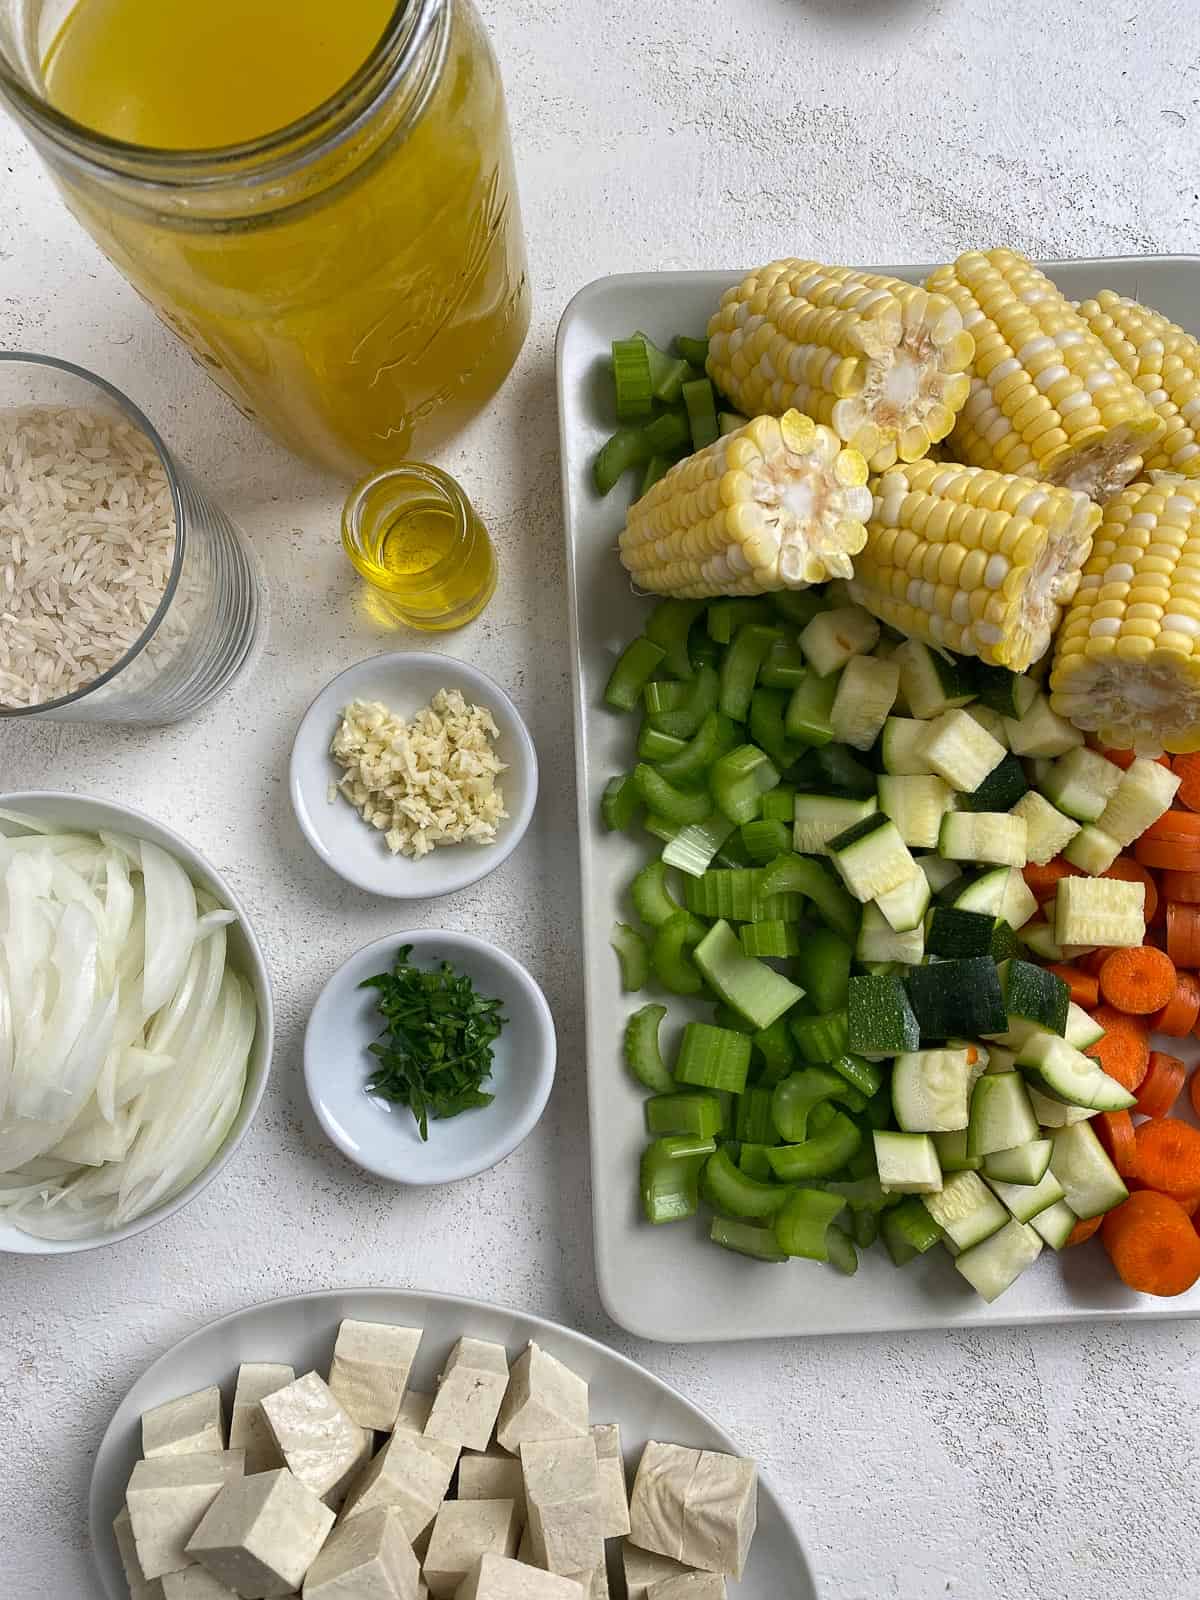 ingredients for Caldo de Tofu against a white surface